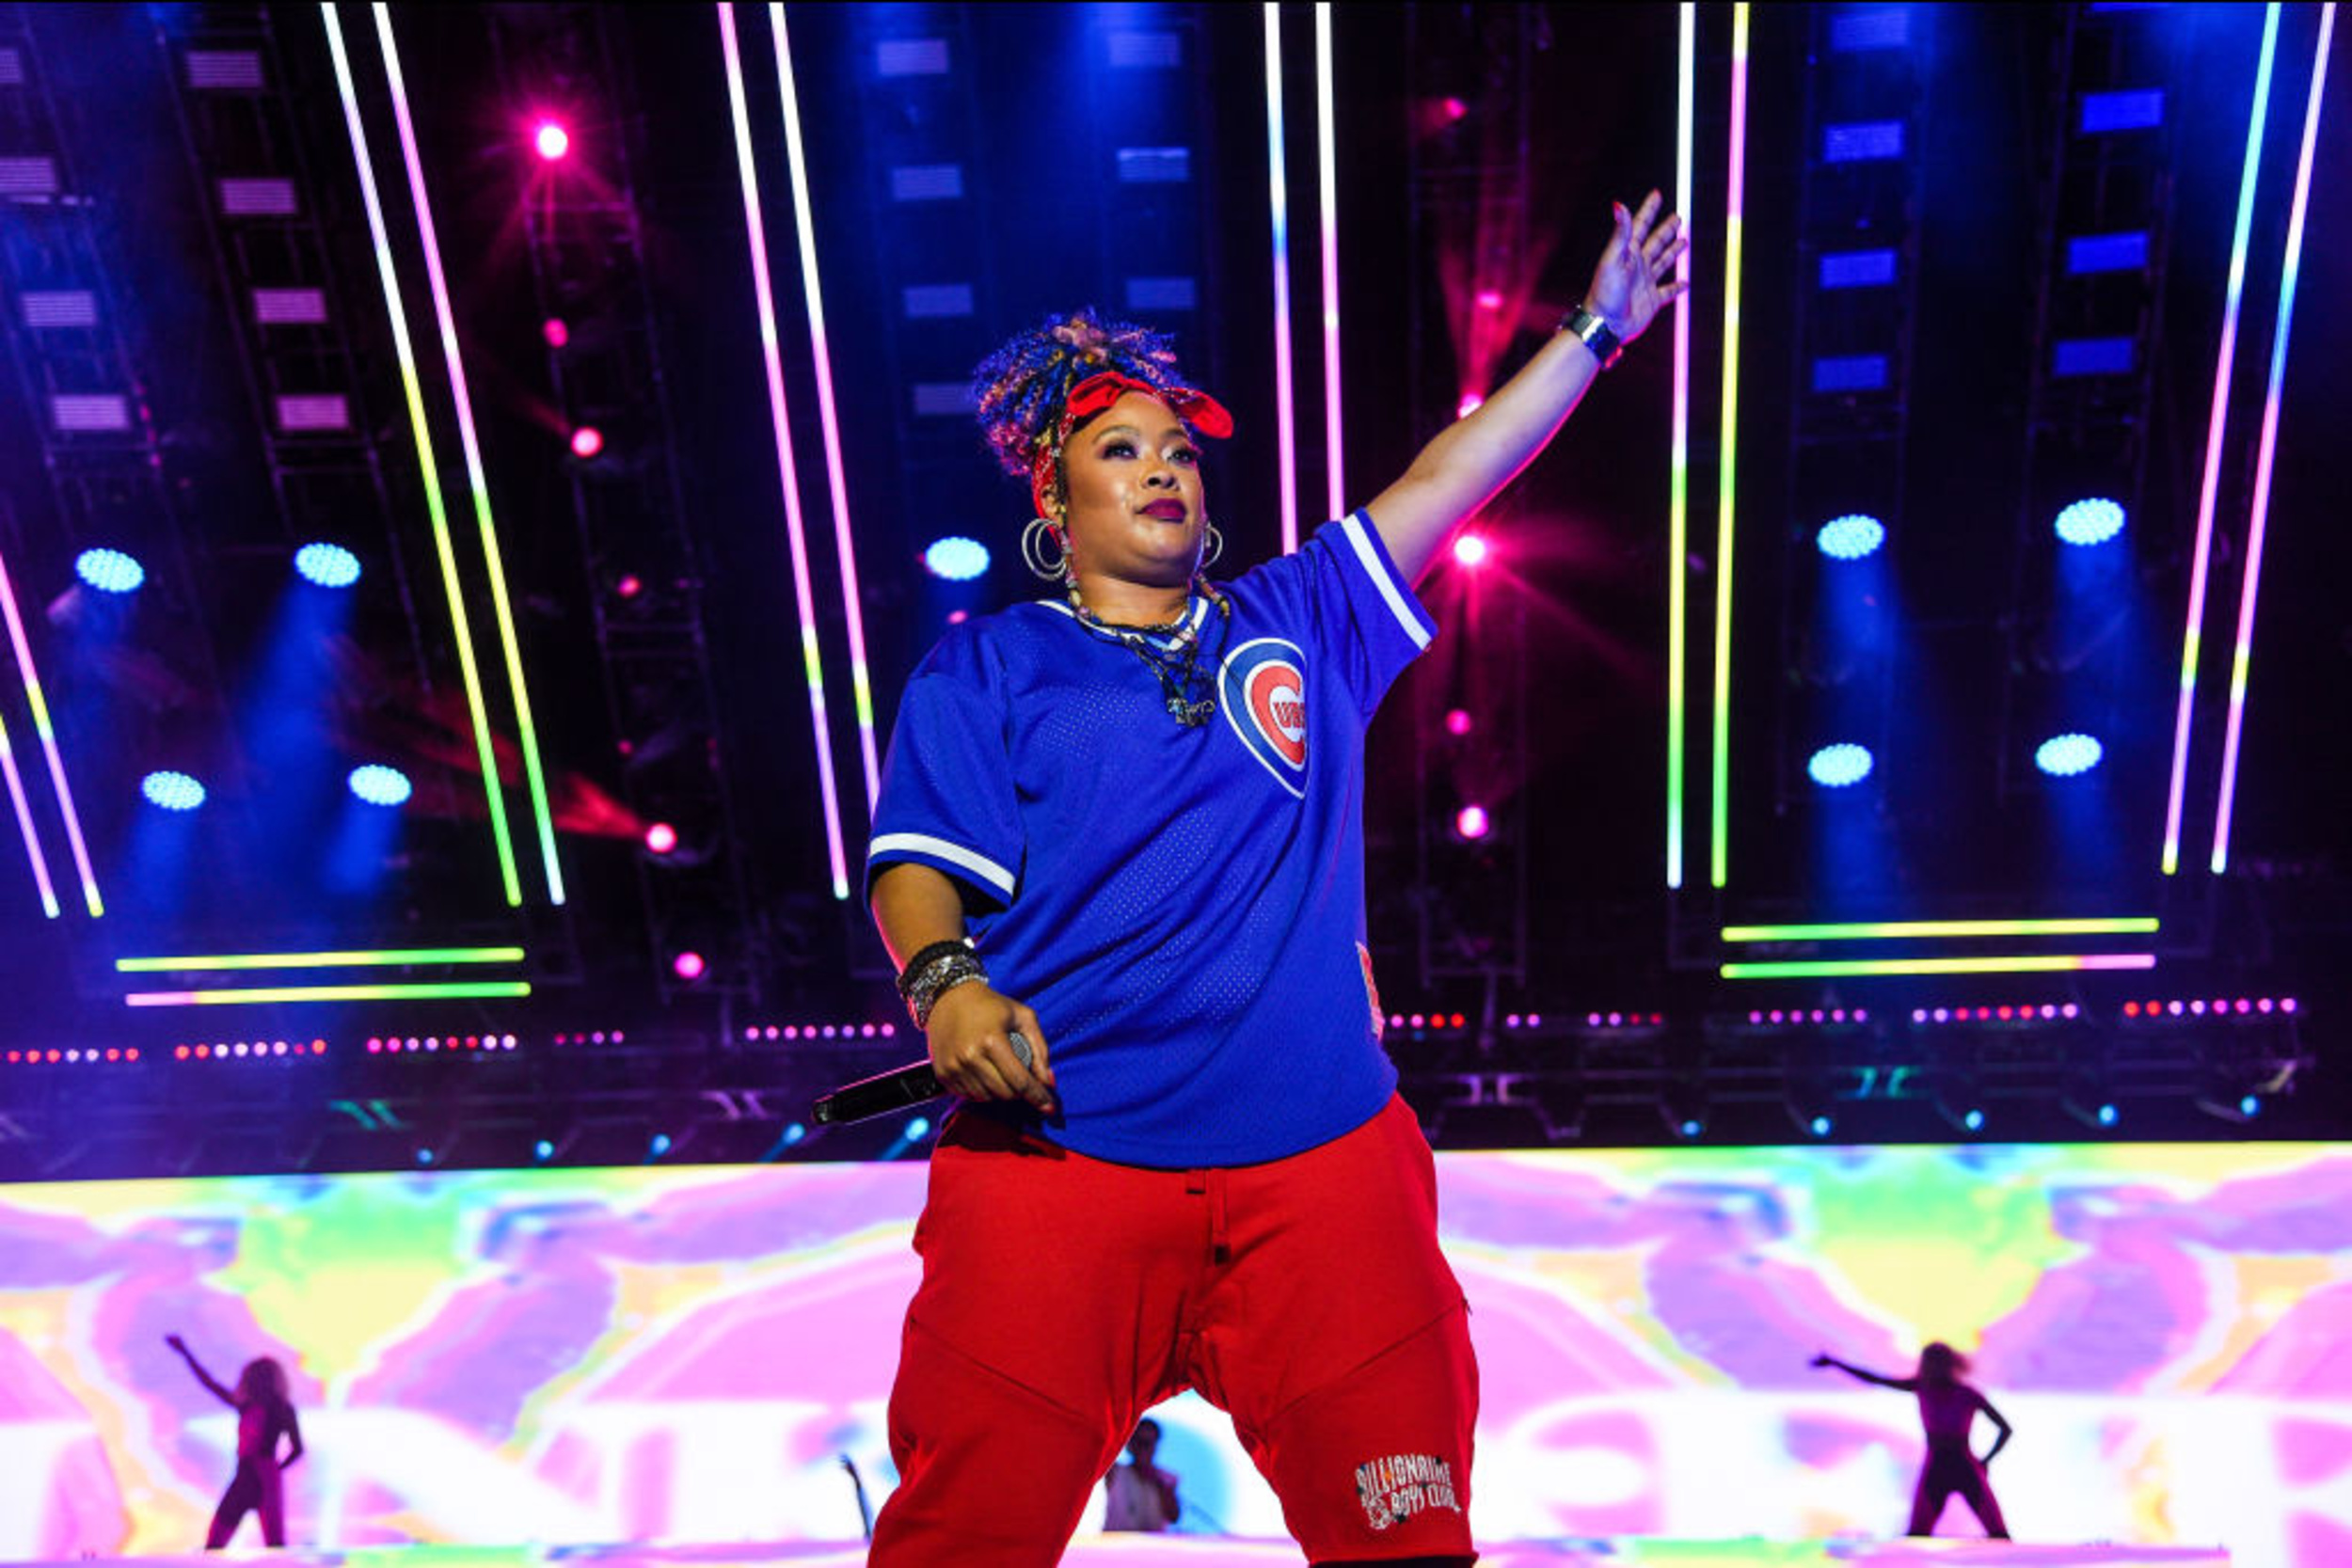 <p>Da Brat got her big break when she won a rap contest sponsored by <em>Yo! MTV Raps.</em> As the winner, she got to meet hip-hop duo Kriss Kross, who introduced her to Jermaine Dupri. Building his So So Def label roster at the time, Dupri signed Brat to a contract, and in 1994, Brat released her debut album <em>Funkdafied.</em> The album was such a huge success that it sold one million copies, making Brat the first female solo rapper with a platinum-selling album. Brat is known for her hit songs like <a href="https://www.youtube.com/watch?v=YFLt1lhbtKM" rel="noopener noreferrer">“Give It 2 You”</a> and “What’chu Like.” </p><p>You may also like: <a href='https://www.yardbarker.com/entertainment/articles/25_movies_that_definitely_did_not_need_a_sequel/s1__29241611'>25 movies that definitely did not need a sequel</a></p>